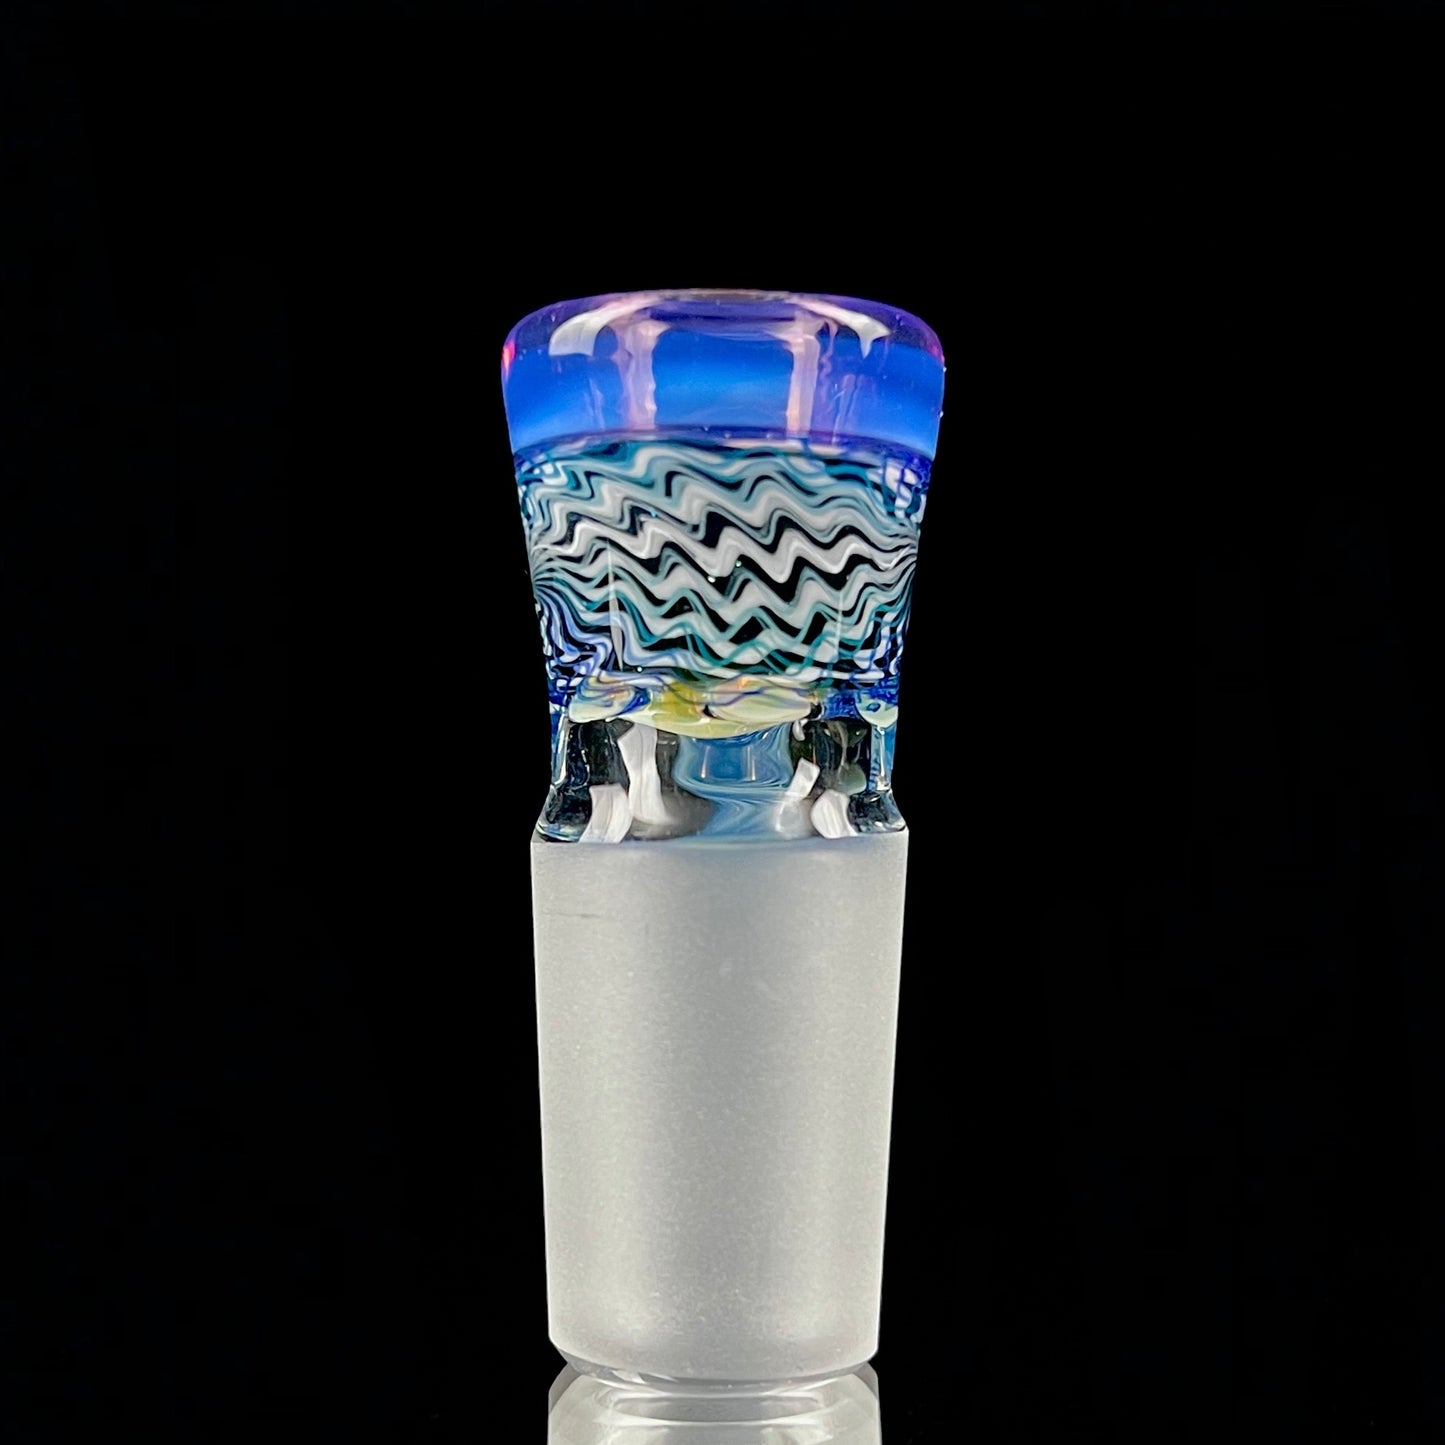 18mm Ice Hypnotech slide by Jared Wetmore